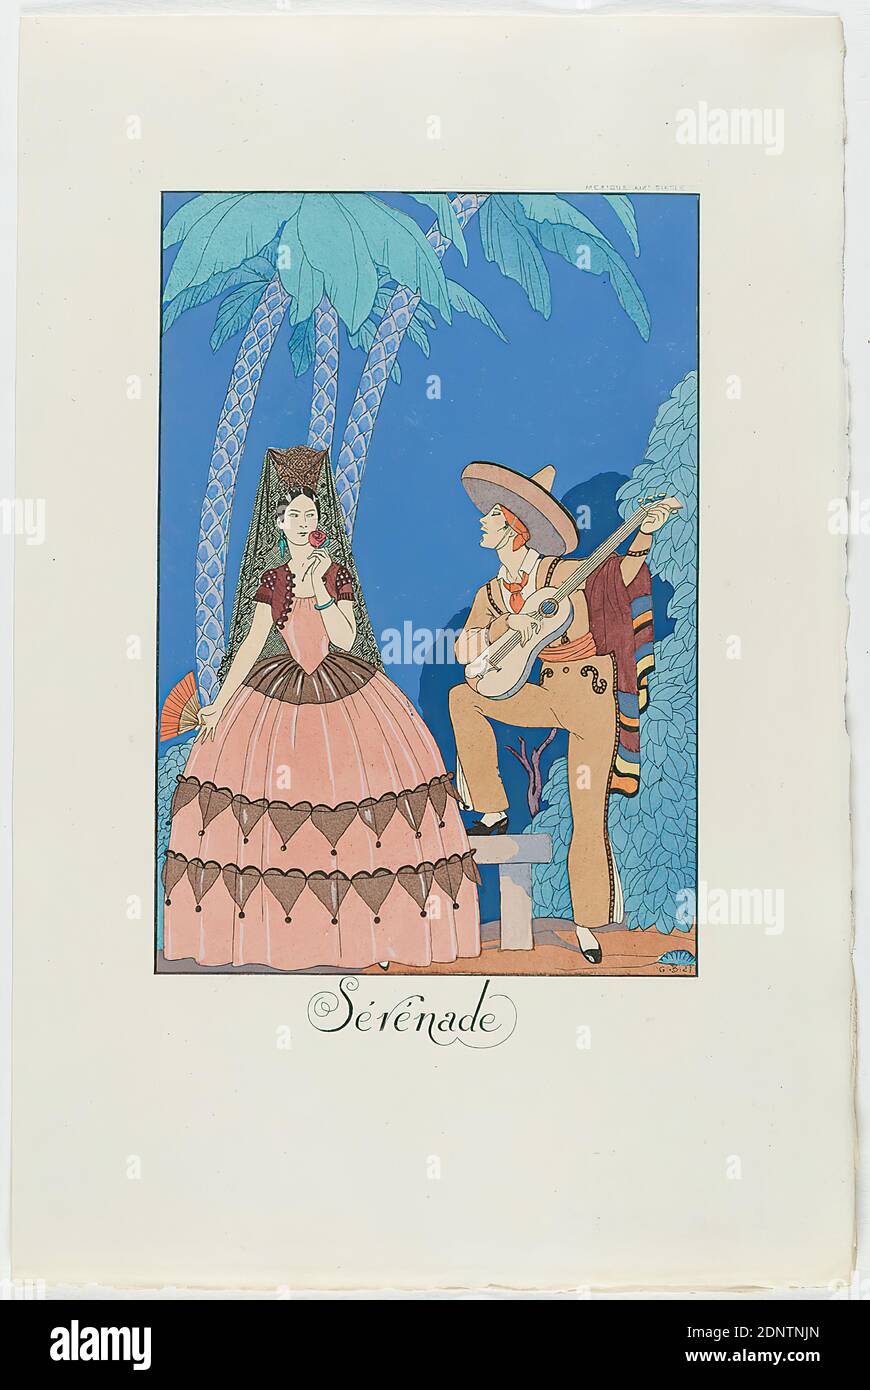 George Barbier, Meynial éditeur, Paris, Sérénade, from the fashion almanac Falbalas et Fanfreluches 1924, handmade paper, opaque watercolor, opaque watercolor, etching, stencil printing (pochoir), pochoir and etching, sheet size: height: 25.5 cm; width: 16.8 cm, monogrammed, inscribed and dated: in the printing forme: G. B. 23, Sérénade, inscribed: in the printing plate: MEXIQUE XIXe SIÈCLE, graphics, folk costume, regional costume, Art Déco Stock Photo